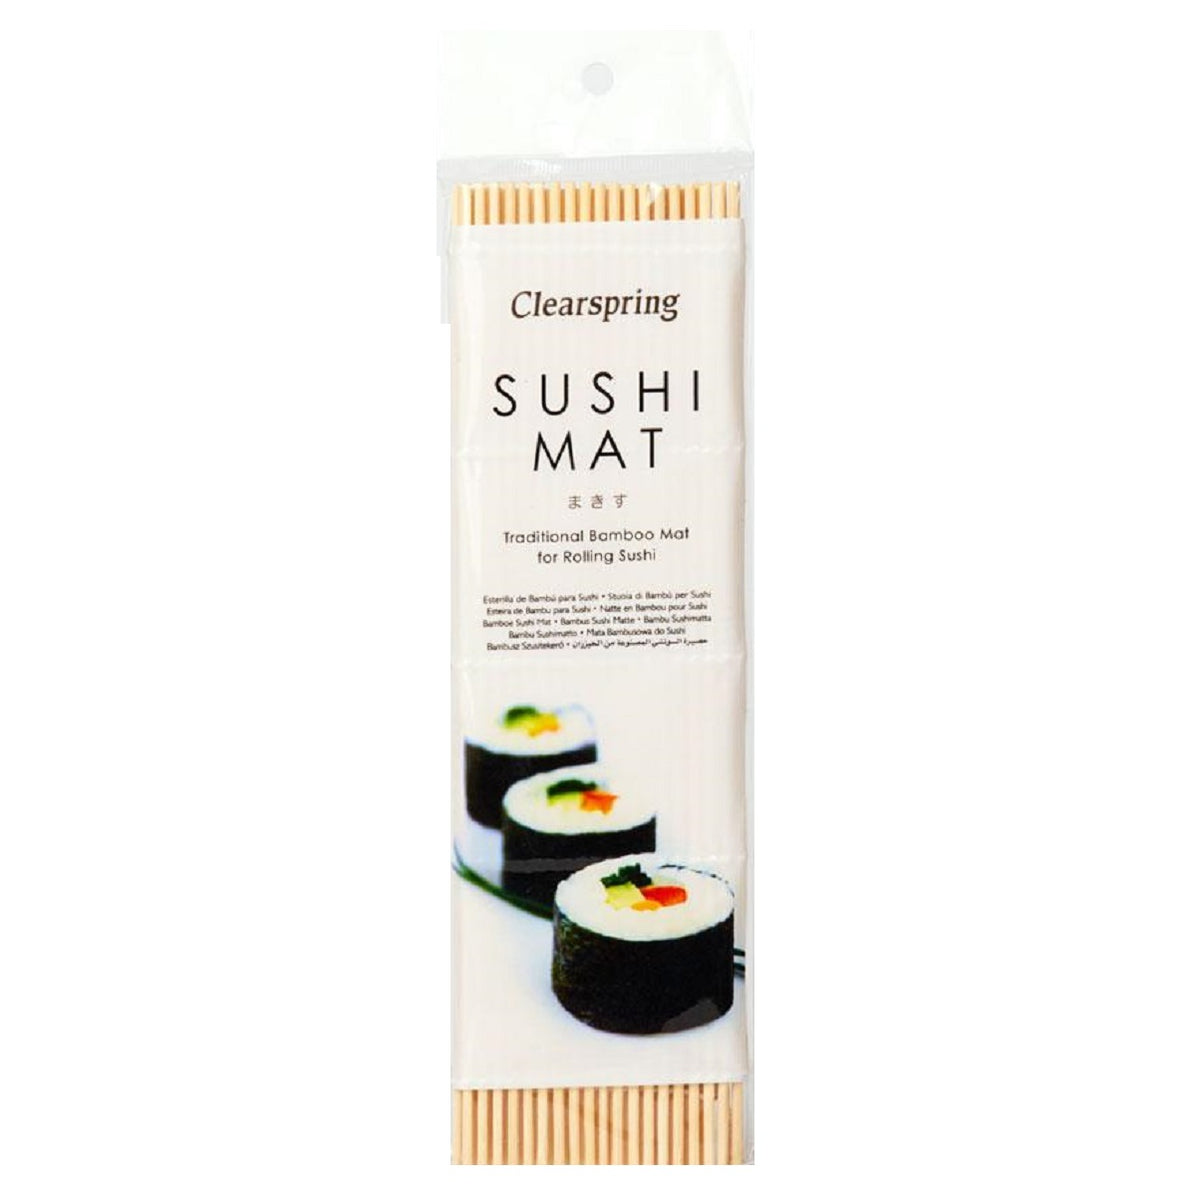 Clearspring Sushi Mat